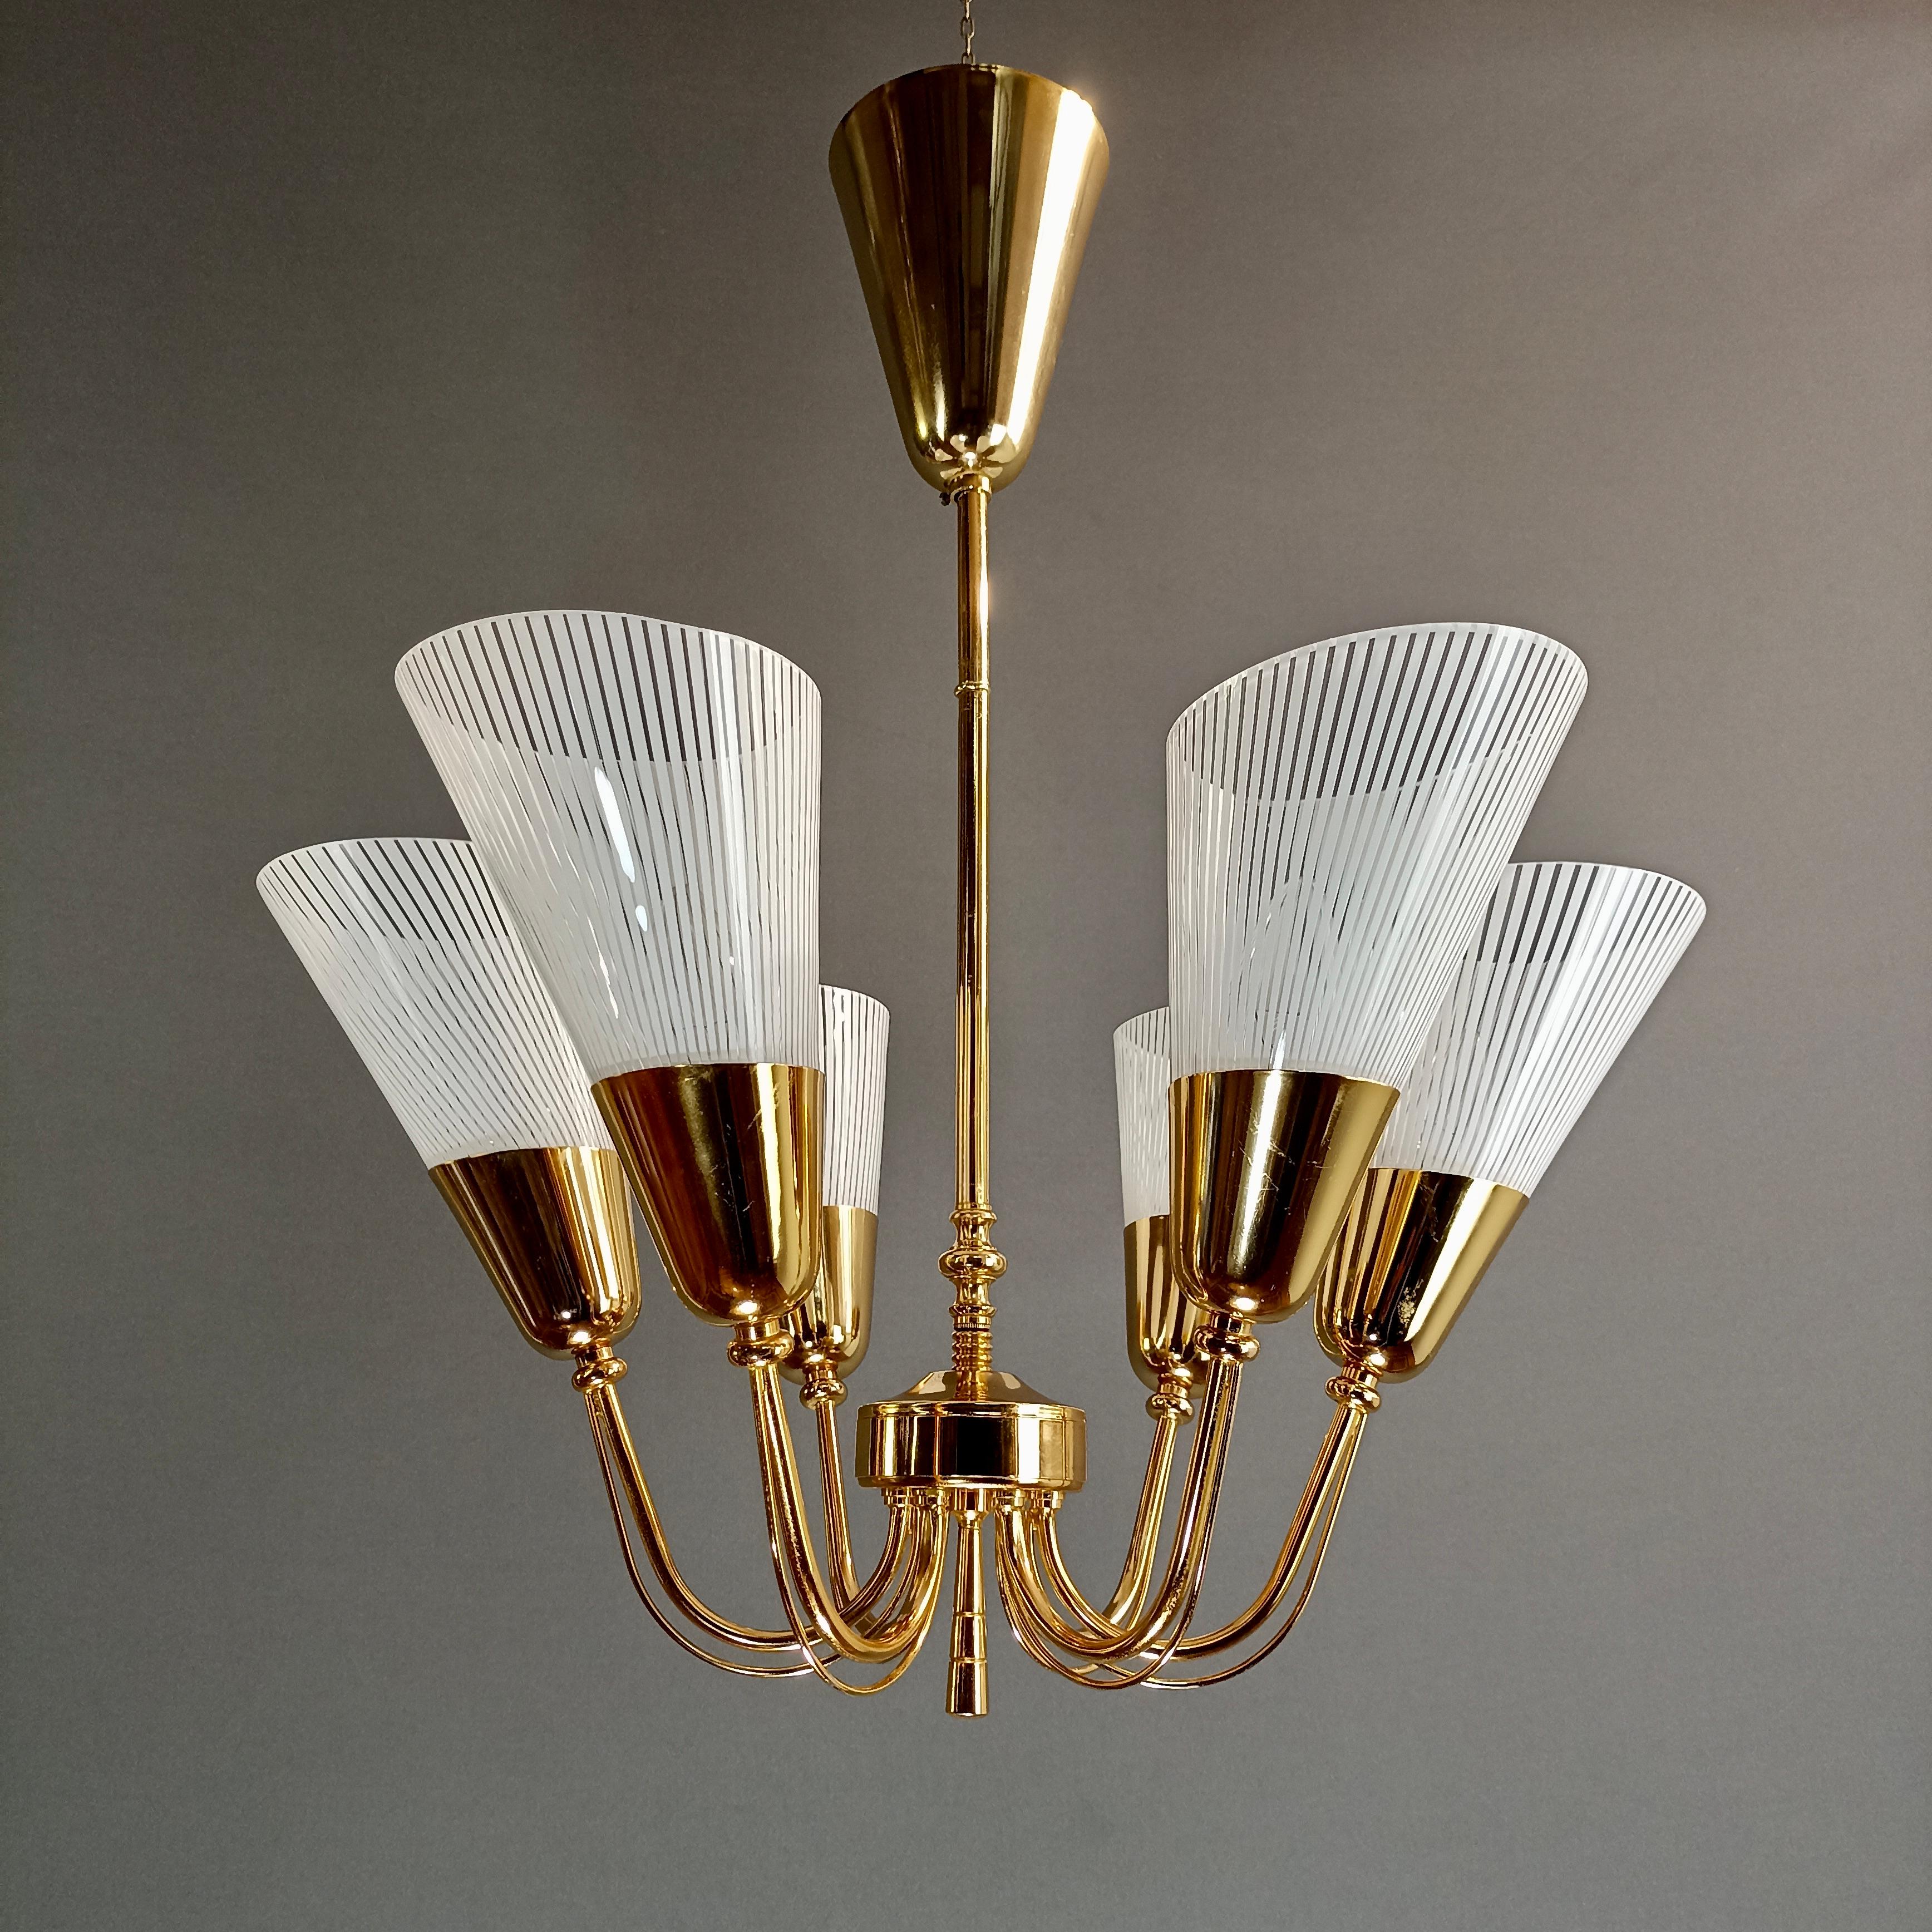 Elegant Italian six-light chandelier in gilded metal and glass from the 1960s. The carefully crafted gilded structure consists of six arms with conical glass holders which, together with the ceiling canopy give the entire chandelier a very refined